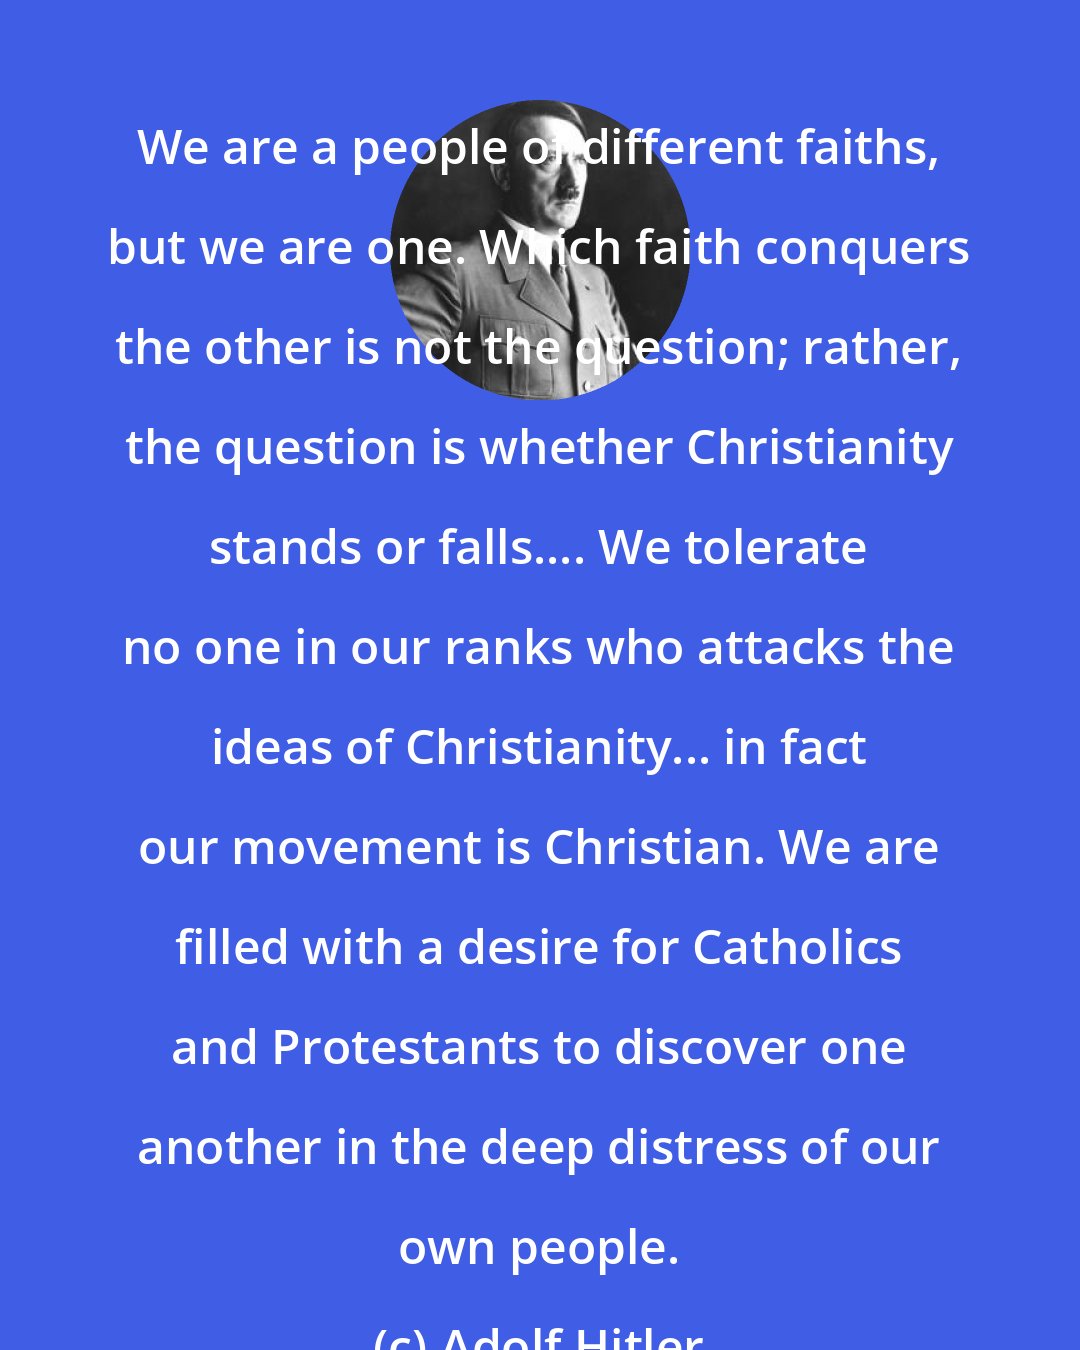 Adolf Hitler: We are a people of different faiths, but we are one. Which faith conquers the other is not the question; rather, the question is whether Christianity stands or falls.... We tolerate no one in our ranks who attacks the ideas of Christianity... in fact our movement is Christian. We are filled with a desire for Catholics and Protestants to discover one another in the deep distress of our own people.